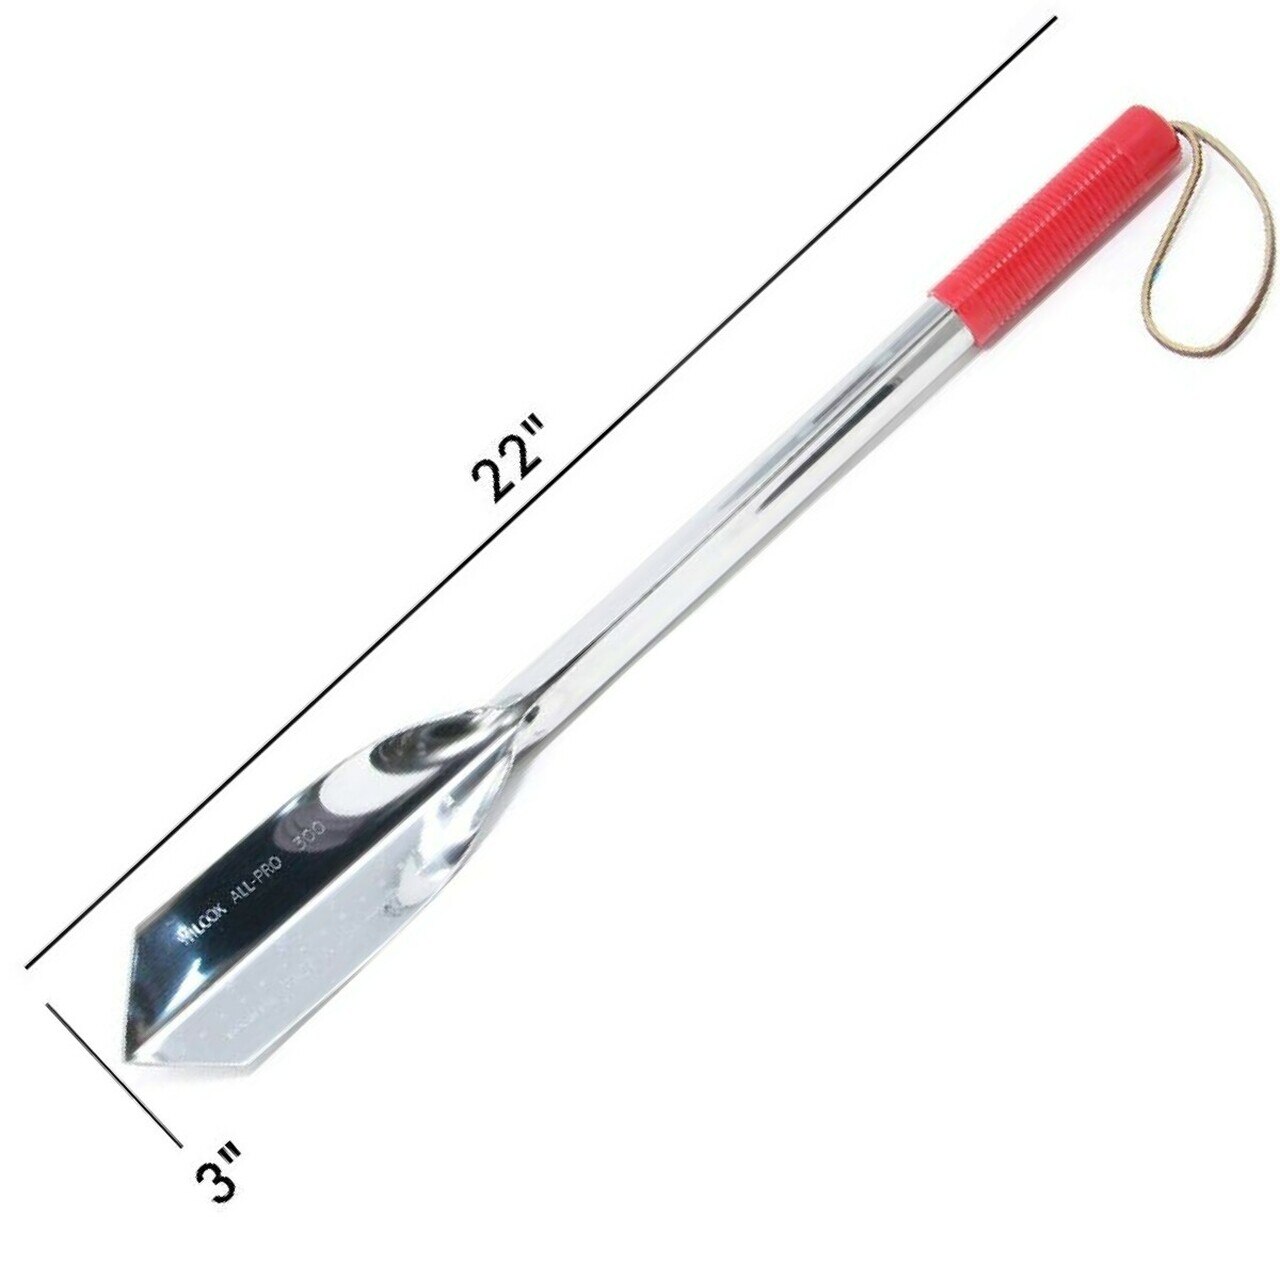 Wilcox 22 inch stainless steel trowel with red handle and leather wrist strap